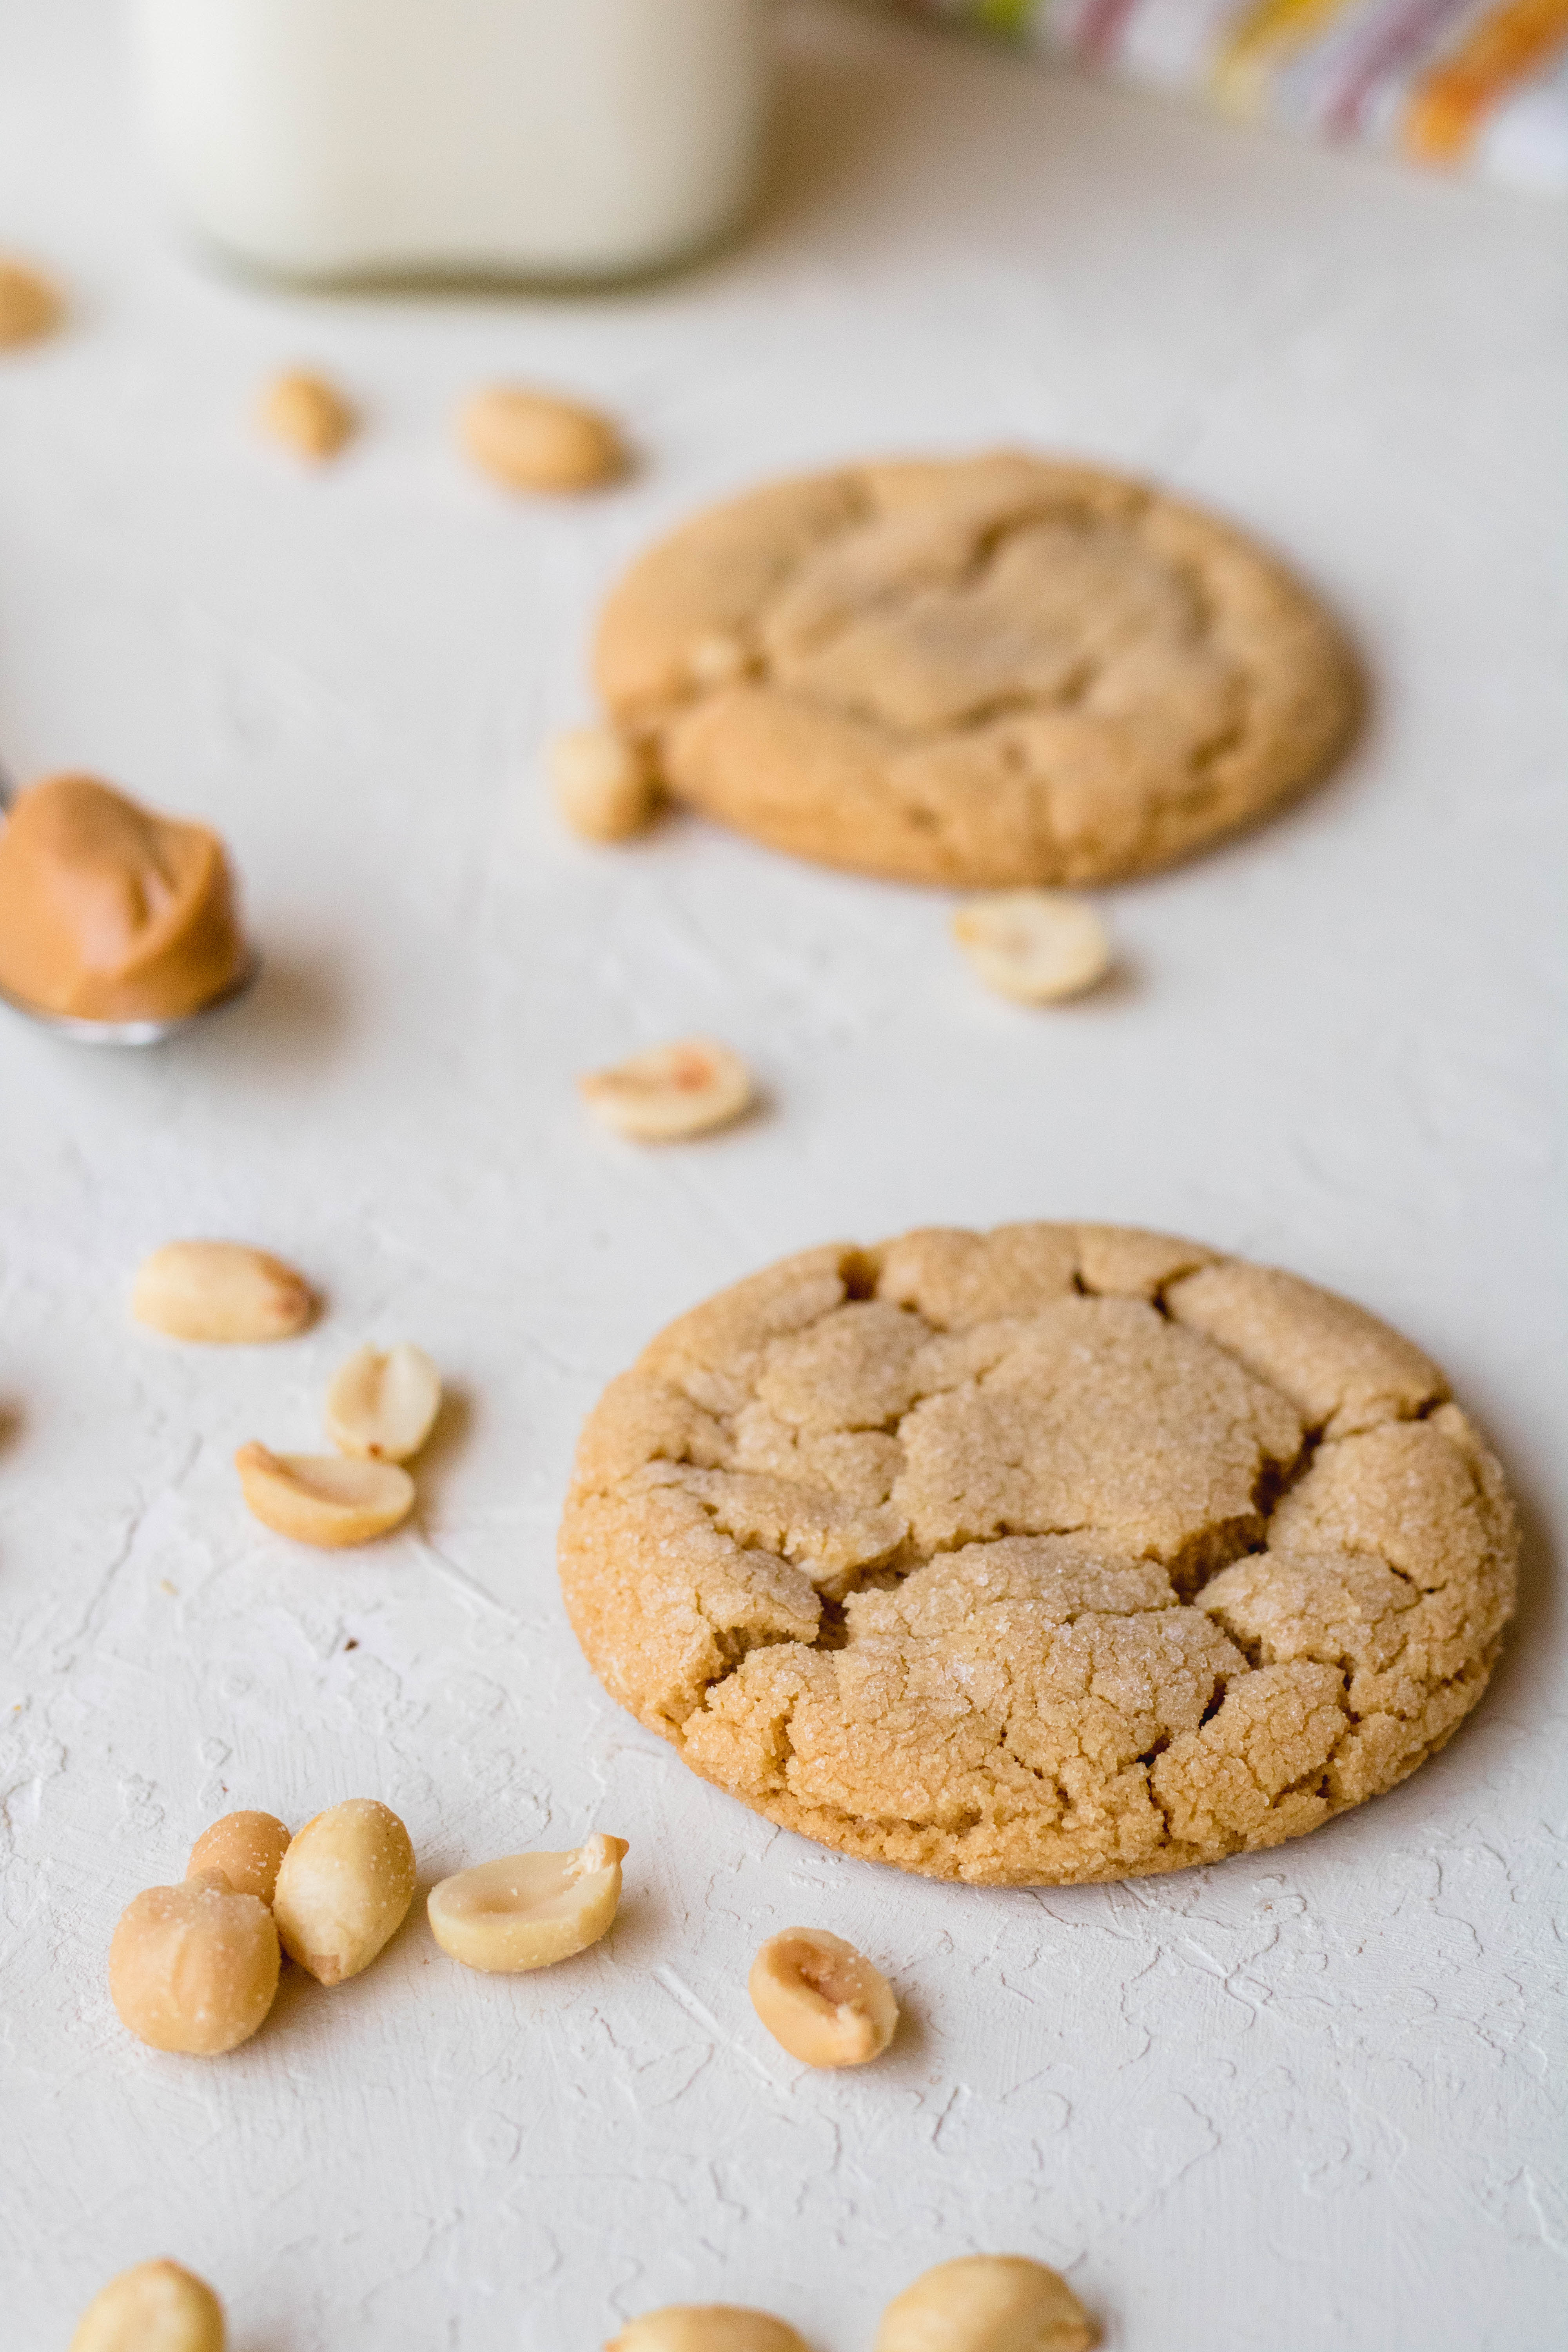 Old fashioned peanut butter cookies